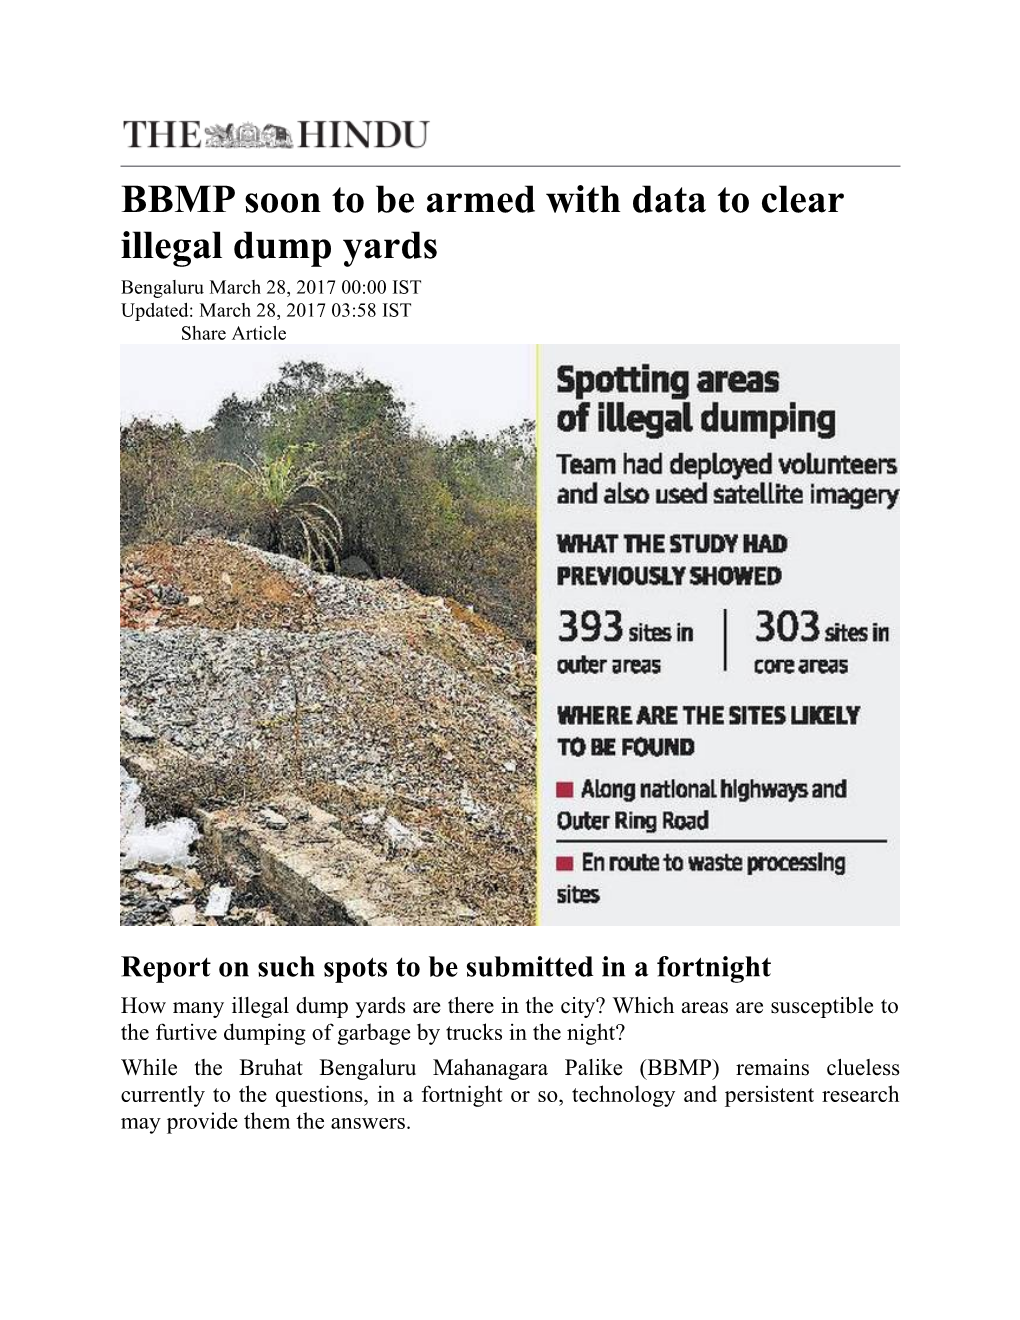 BBMP Soon to Be Armed with Data to Clear Illegal Dump Yards